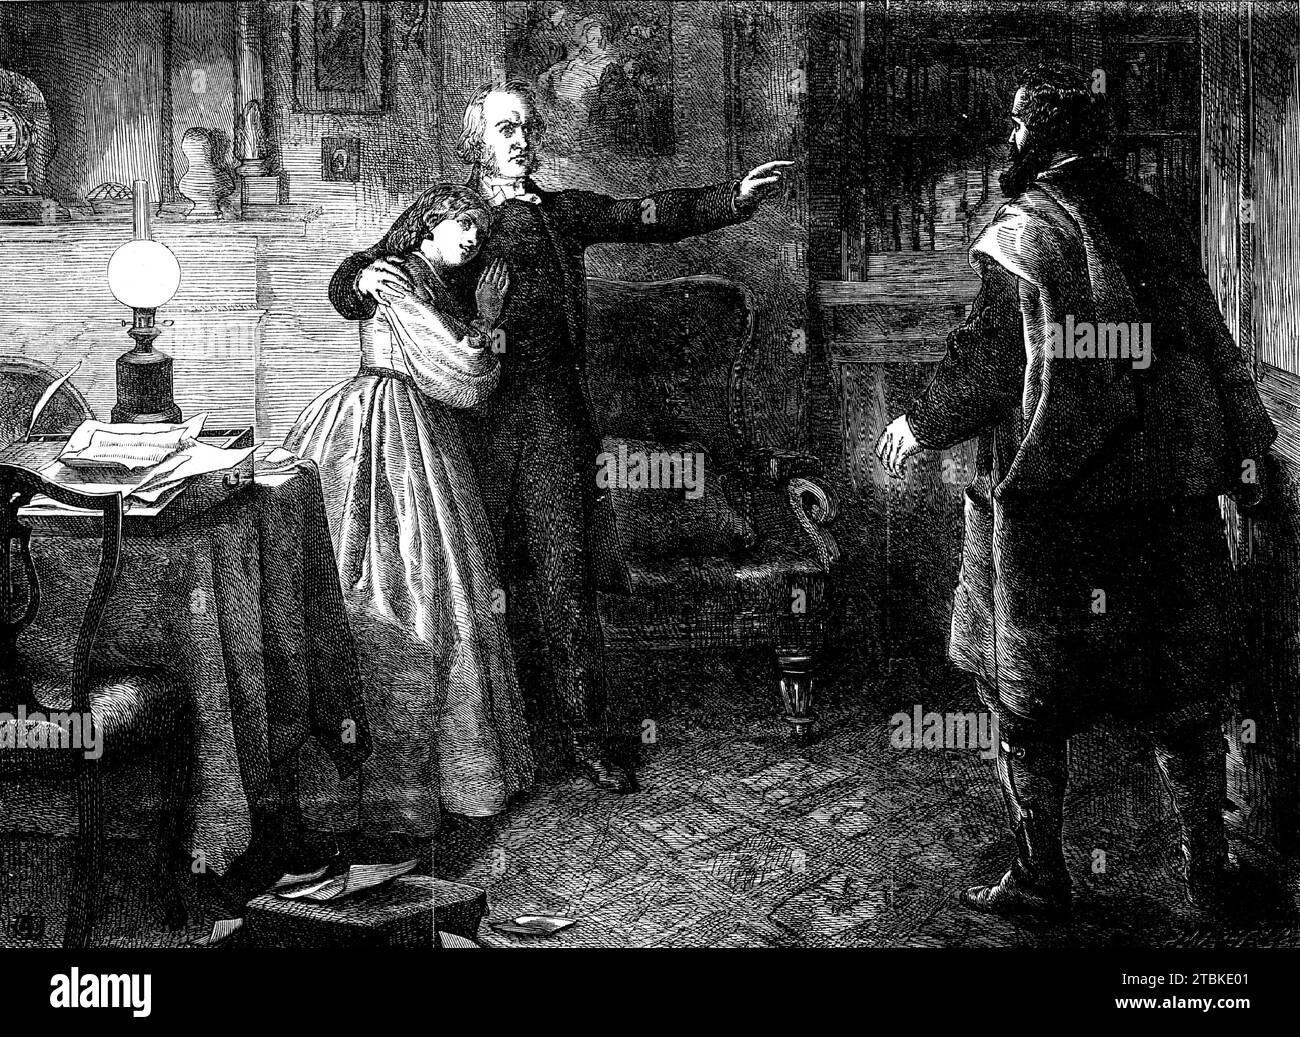 &quot;The Curate of Glevering&quot;, the Denunciation of Charles Trevor -  drawn by J. D. Watson, 1861. Illustration to a Christmas short story by William J. Stewart. '&quot;Her face flushed crimson, but her voice was calm. &quot;Yes, Louis.&quot; &quot;I want to recall - without mentioning his name, so hard should I find it to do so calmly - one who - who&quot; - &quot;I will spare you the pain, Louis,&quot; she said calmly. &quot;You mean Charles Trevor, who was so false - to you in friendship, and in love to me.&quot; He looked up in amaze at her calm face, his own racked and white with pas Stock Photo